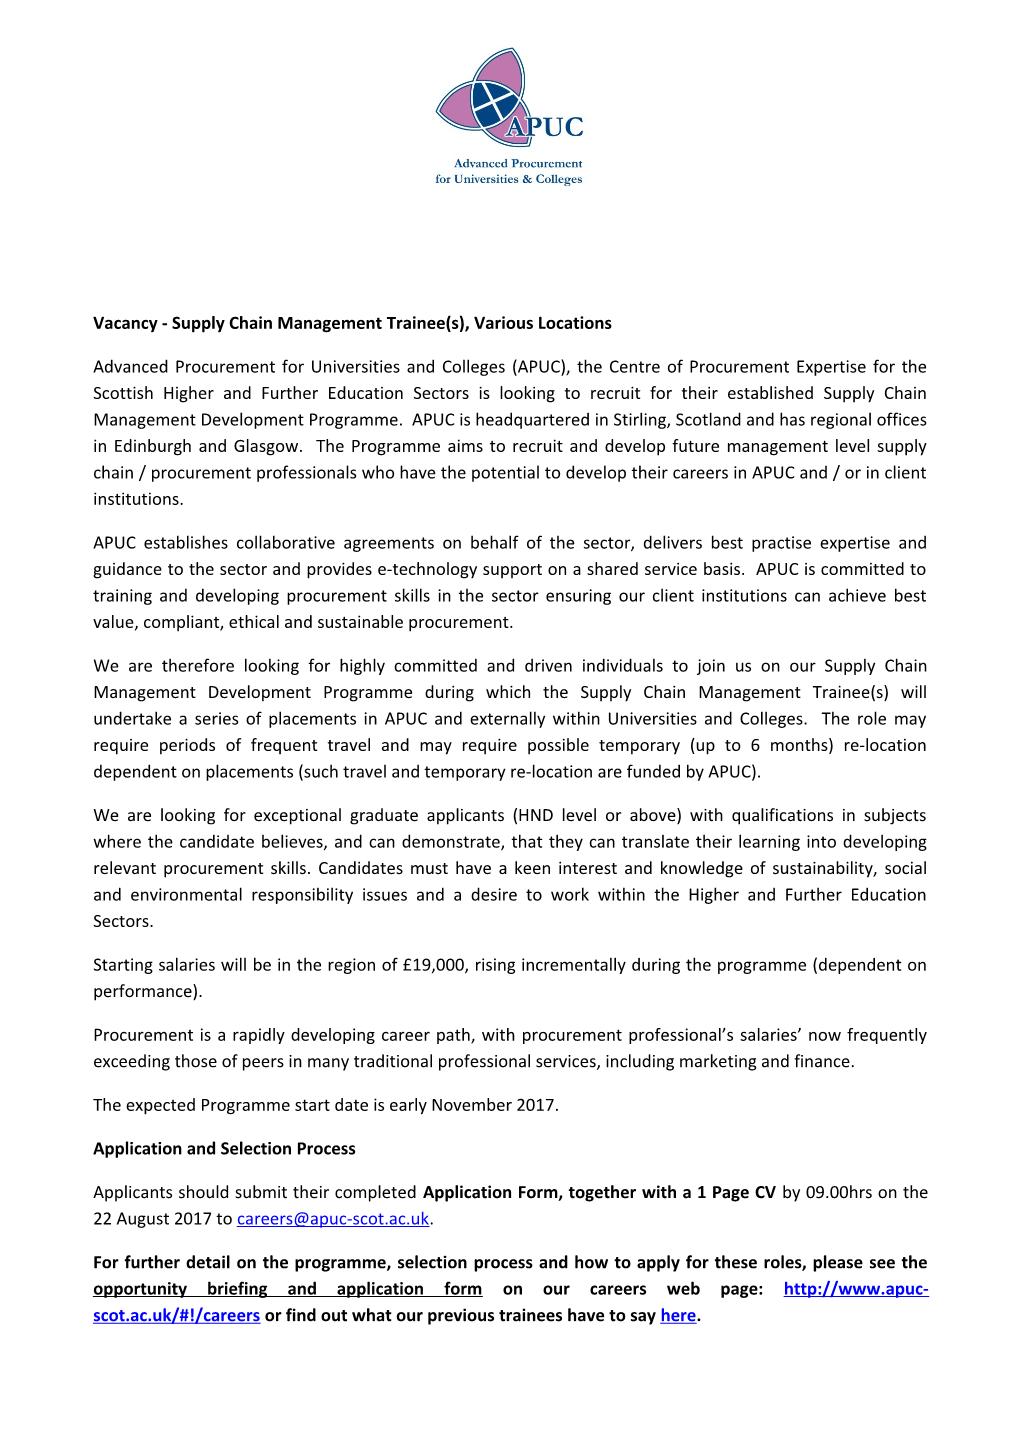 Vacancy - Supply Chain Management Trainee(S), Various Locations